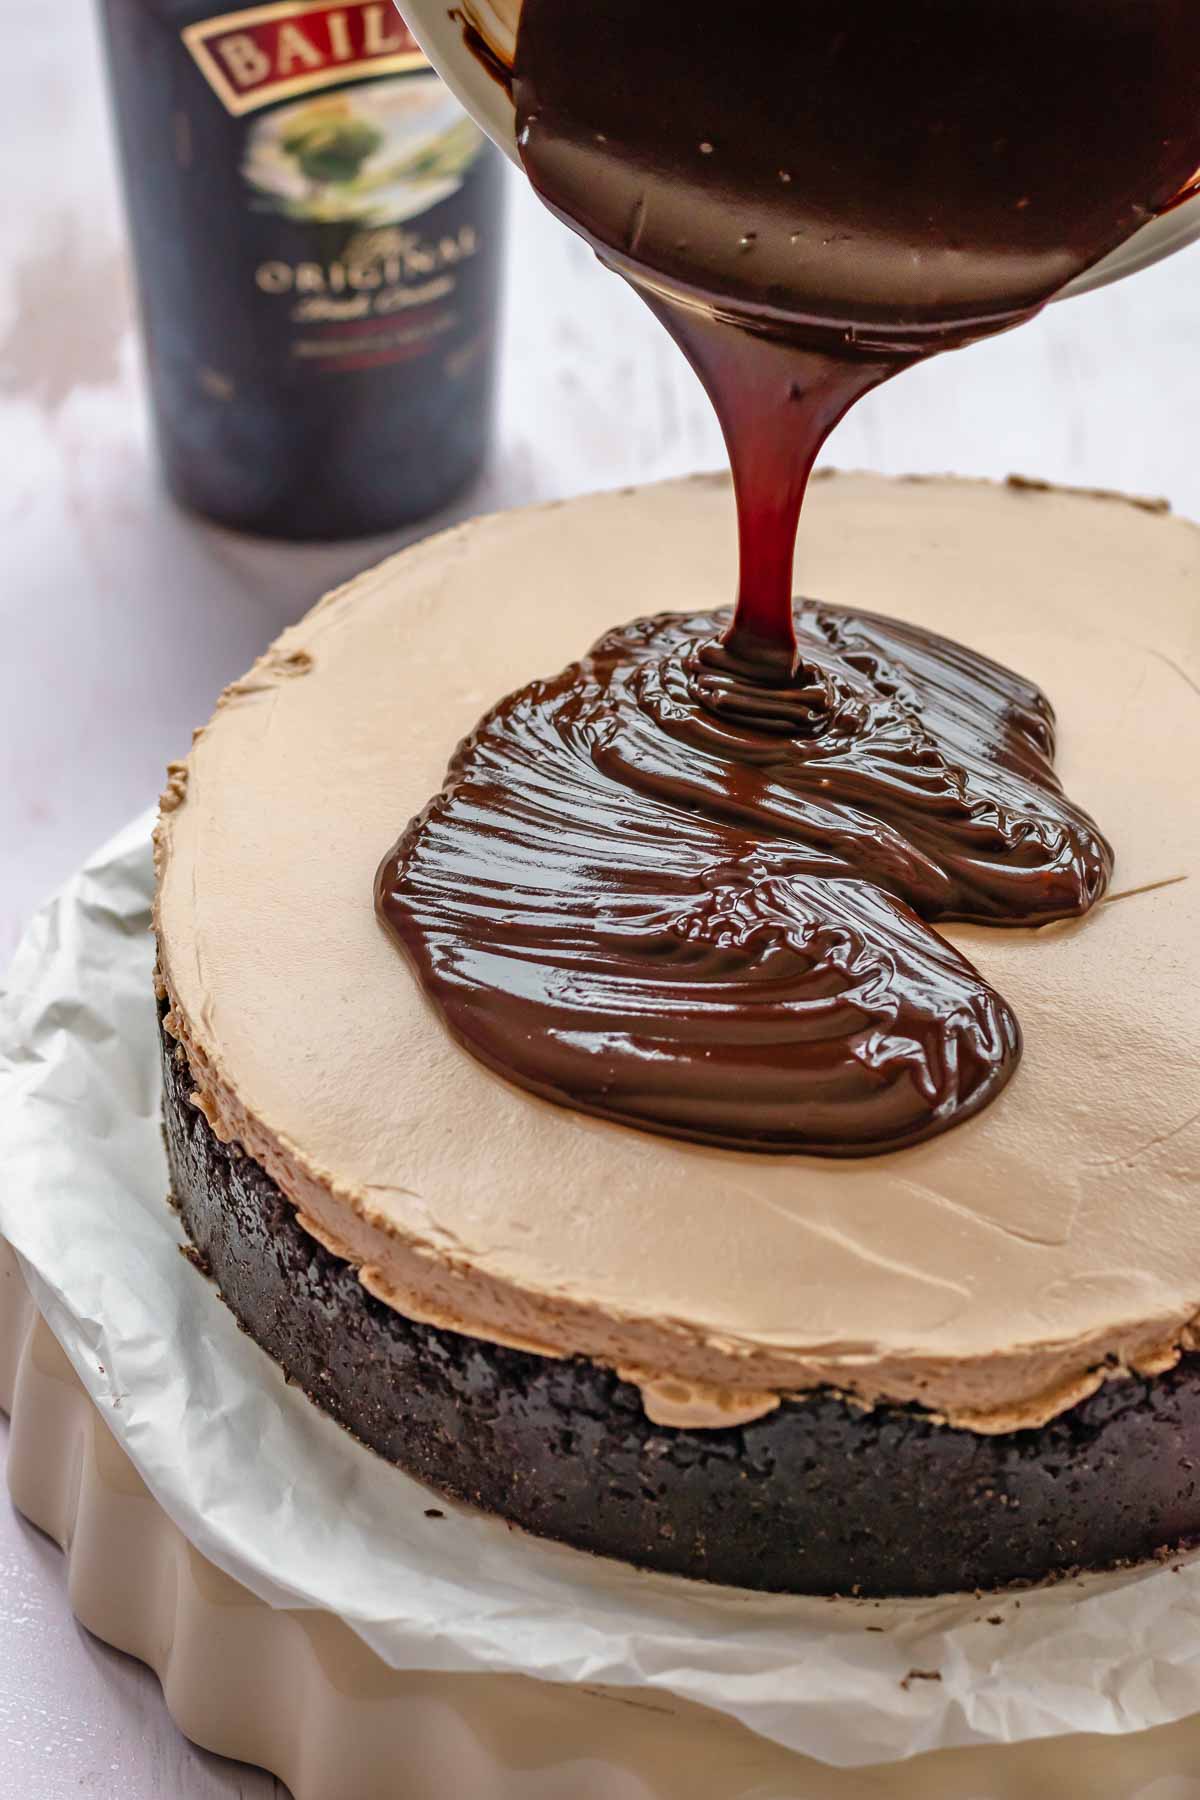 Chocolate ganache pouring on top of cheesecake.